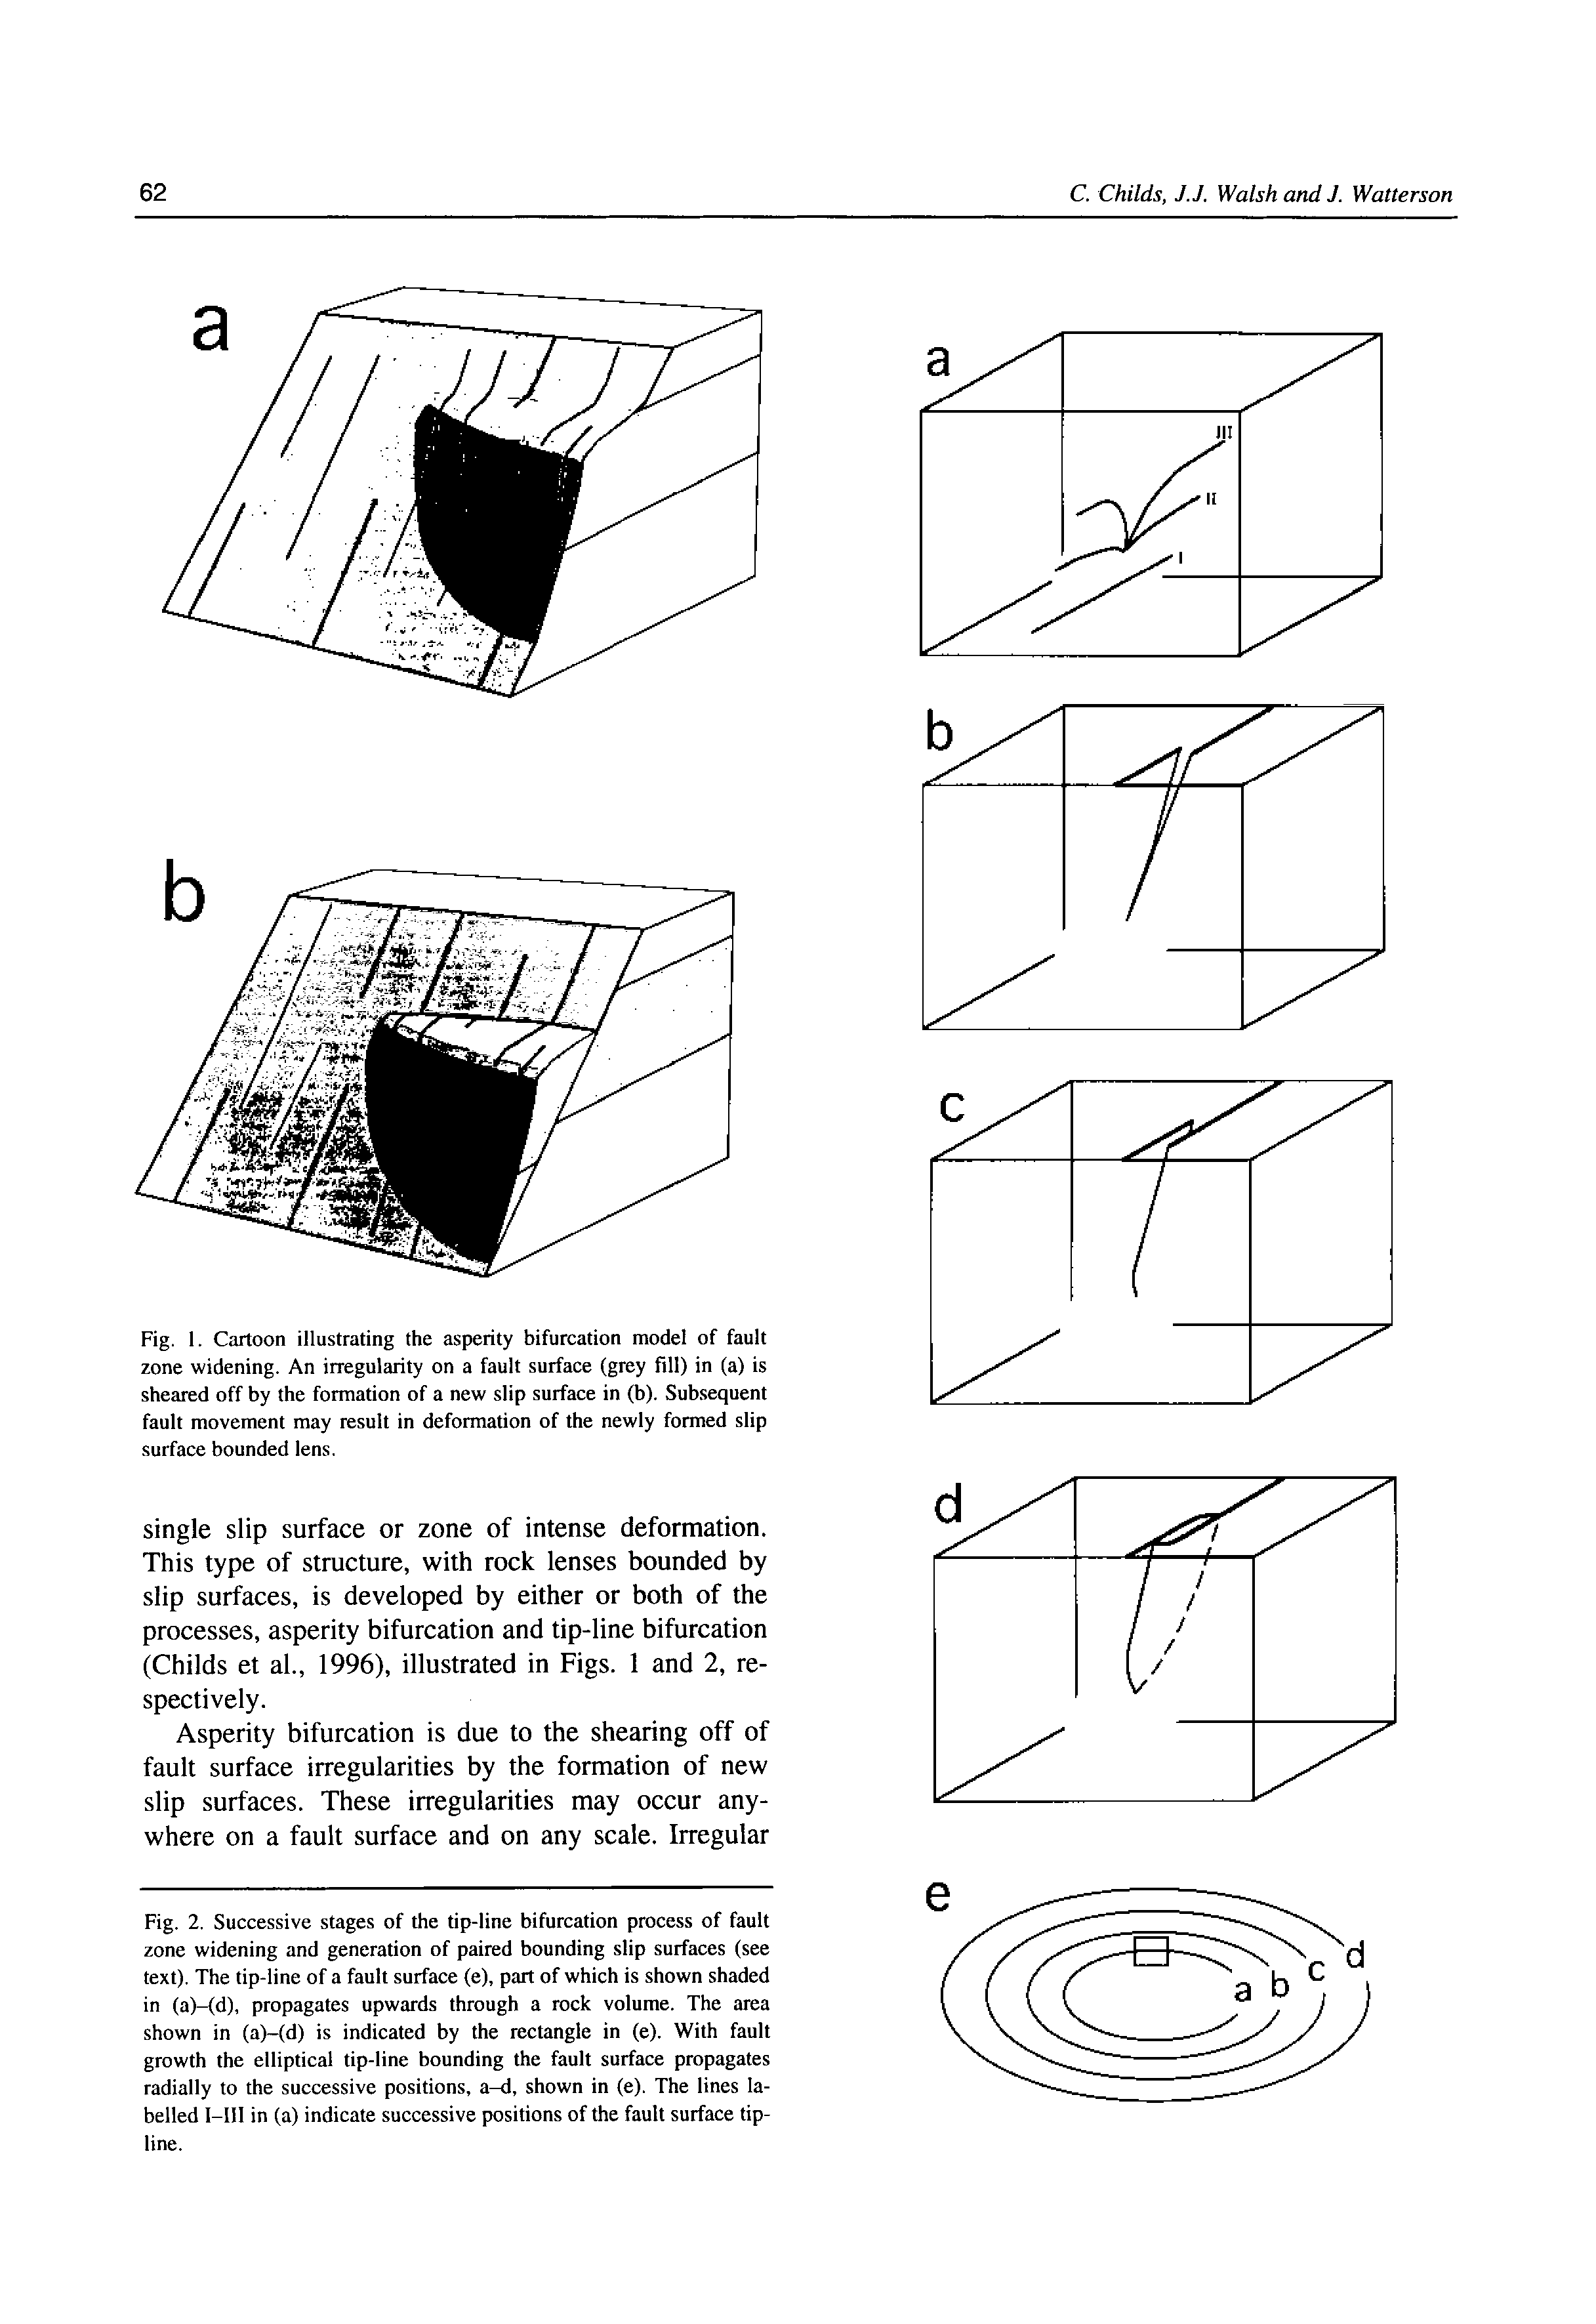 Fig. 2. Successive stages of the tip-line bifurcation process of fault zone widening and generation of paired bounding slip surfaces (see text). The tip-line of a fault surface (e), part of which is shown shaded in (a)-(d), propagates upwards through a rock volume. The area shown in (a)-(d) is indicated by the rectangle in (e). With fault growth the elliptical tip-line bounding the fault surface propagates radially to the successive positions, a-d, shown in (e). The lines labelled I-III in (a) indicate successive positions of the fault surface tipline.